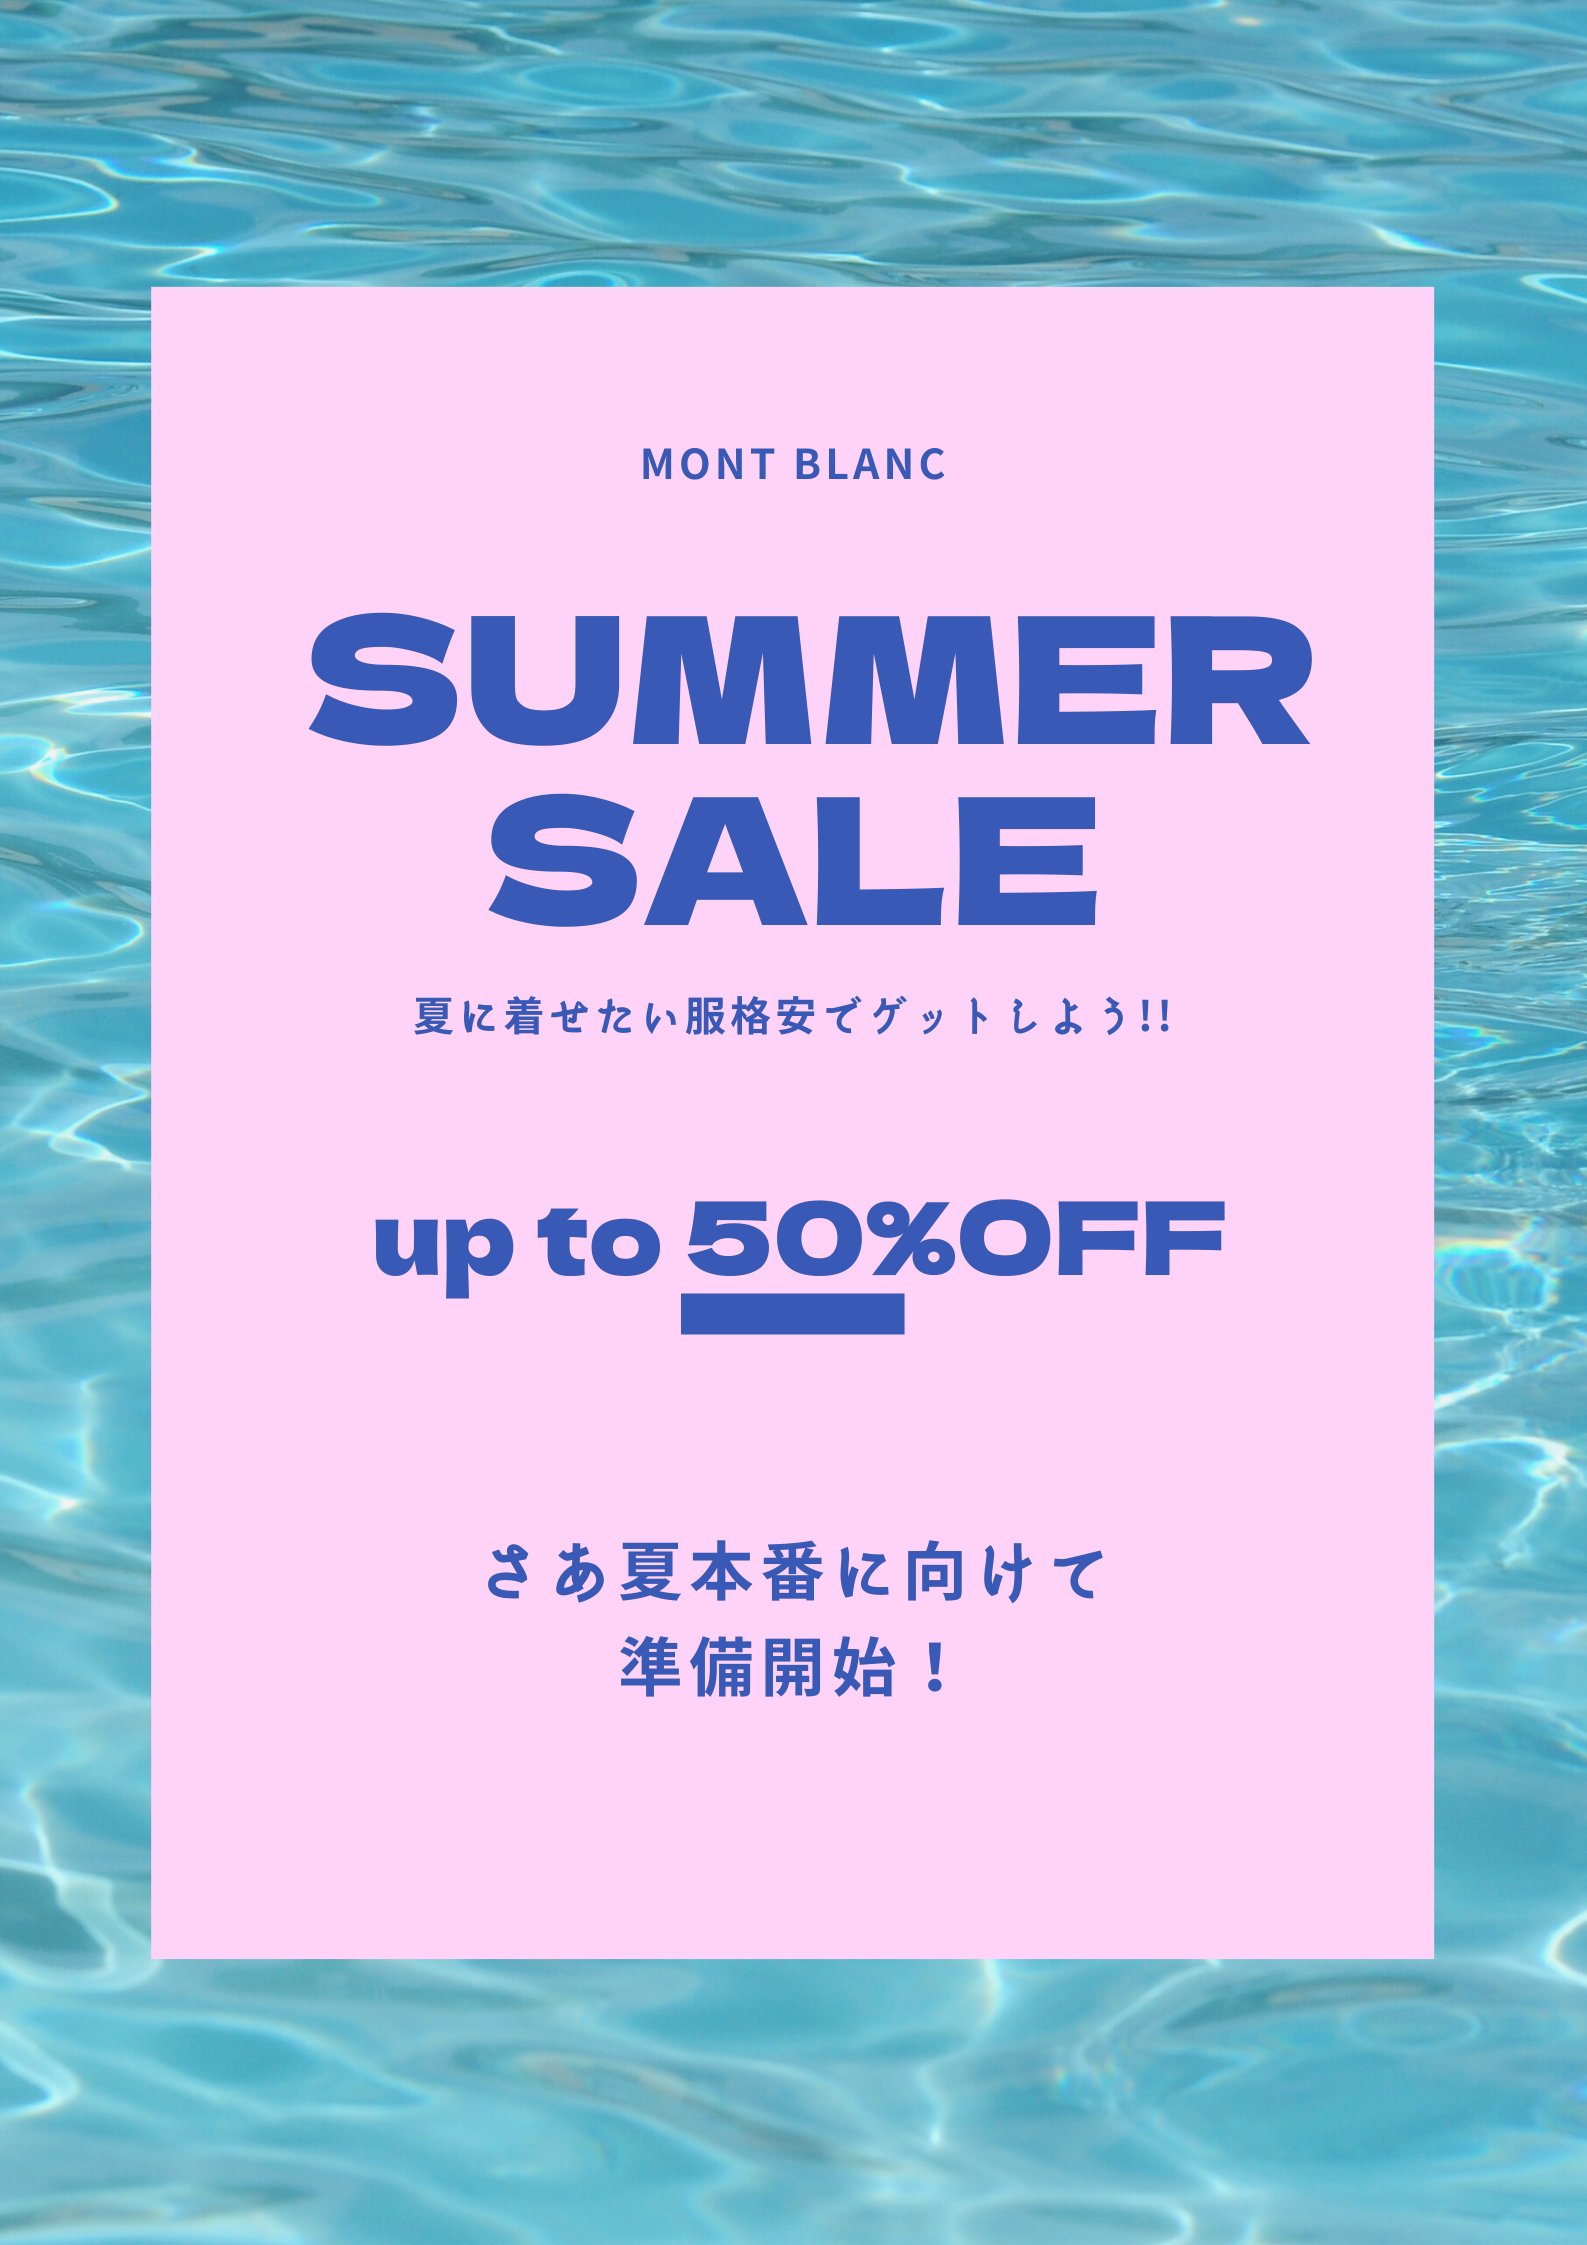 【UP to 50%OFF SALE 開催中】